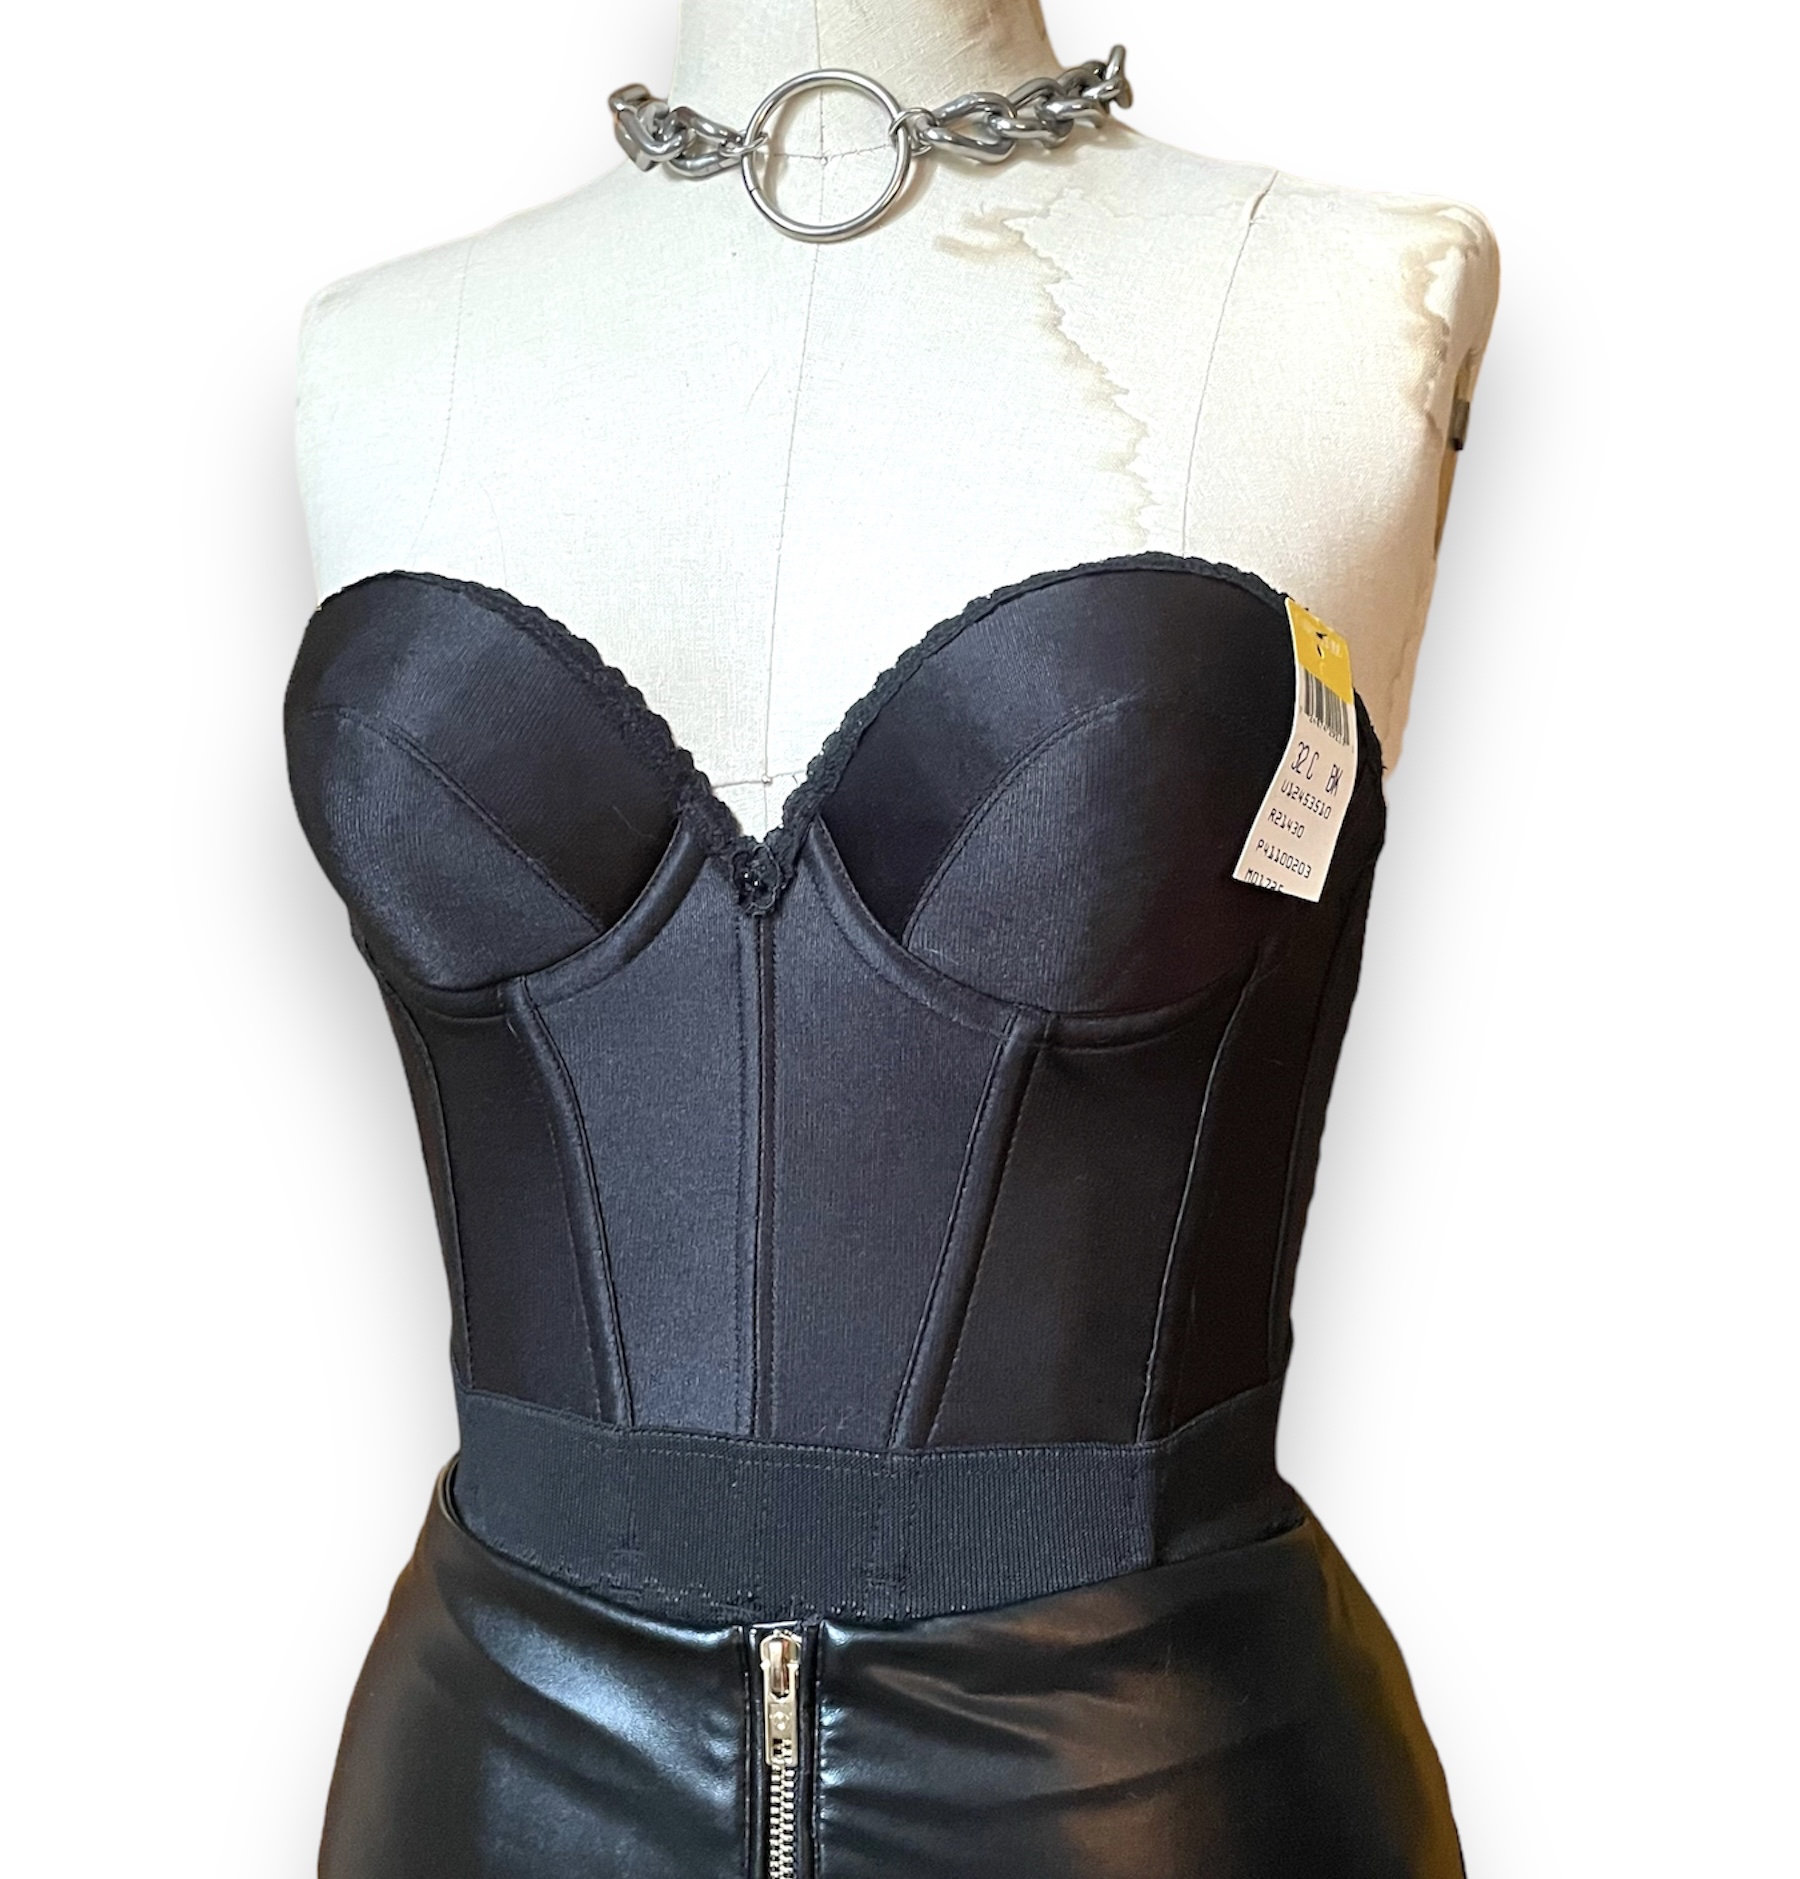 NEW NBD Hailee Bustier Top in Black STRAPLESS CORSET BONED SIZE S SMALL *MM